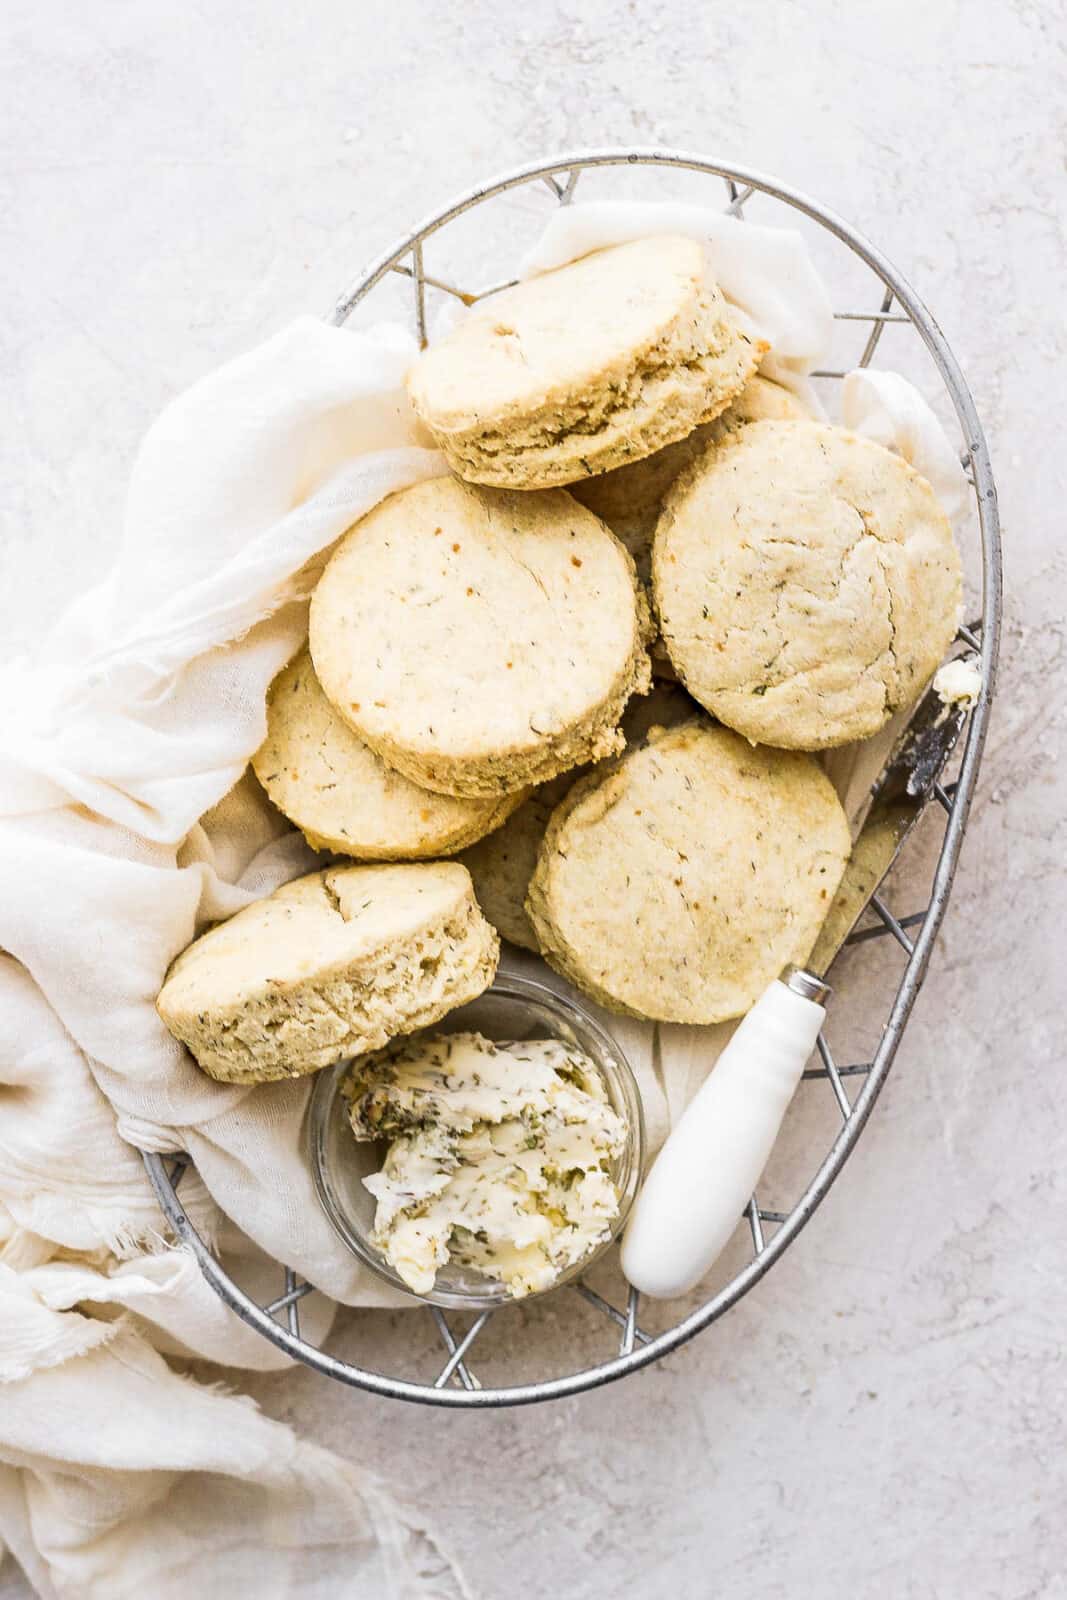 Gluten free biscuits in a basket with a small dish of herbed butter spread.